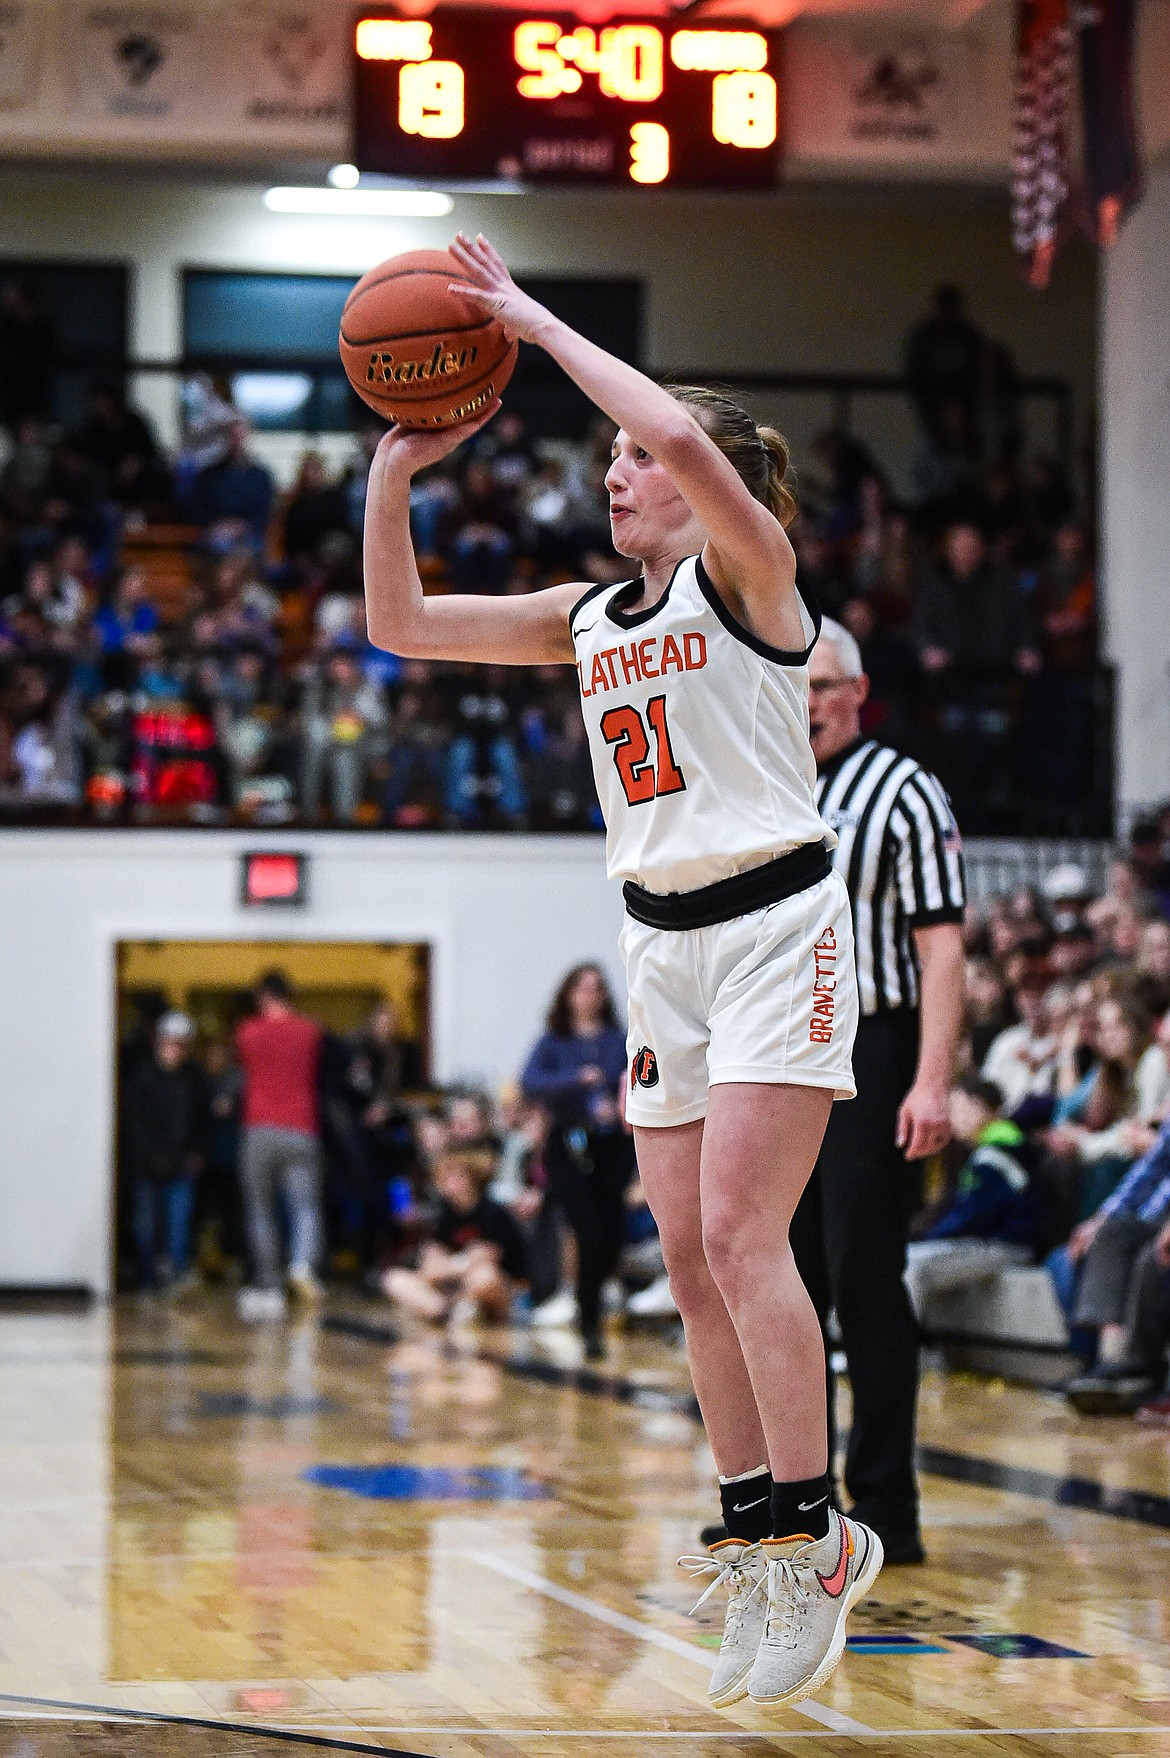 Flathead's Harlie Roth (21) shoots in the second half against Glacier at Flathead High School on Friday, Jan. 19. (Casey Kreider/Daily Inter Lake)